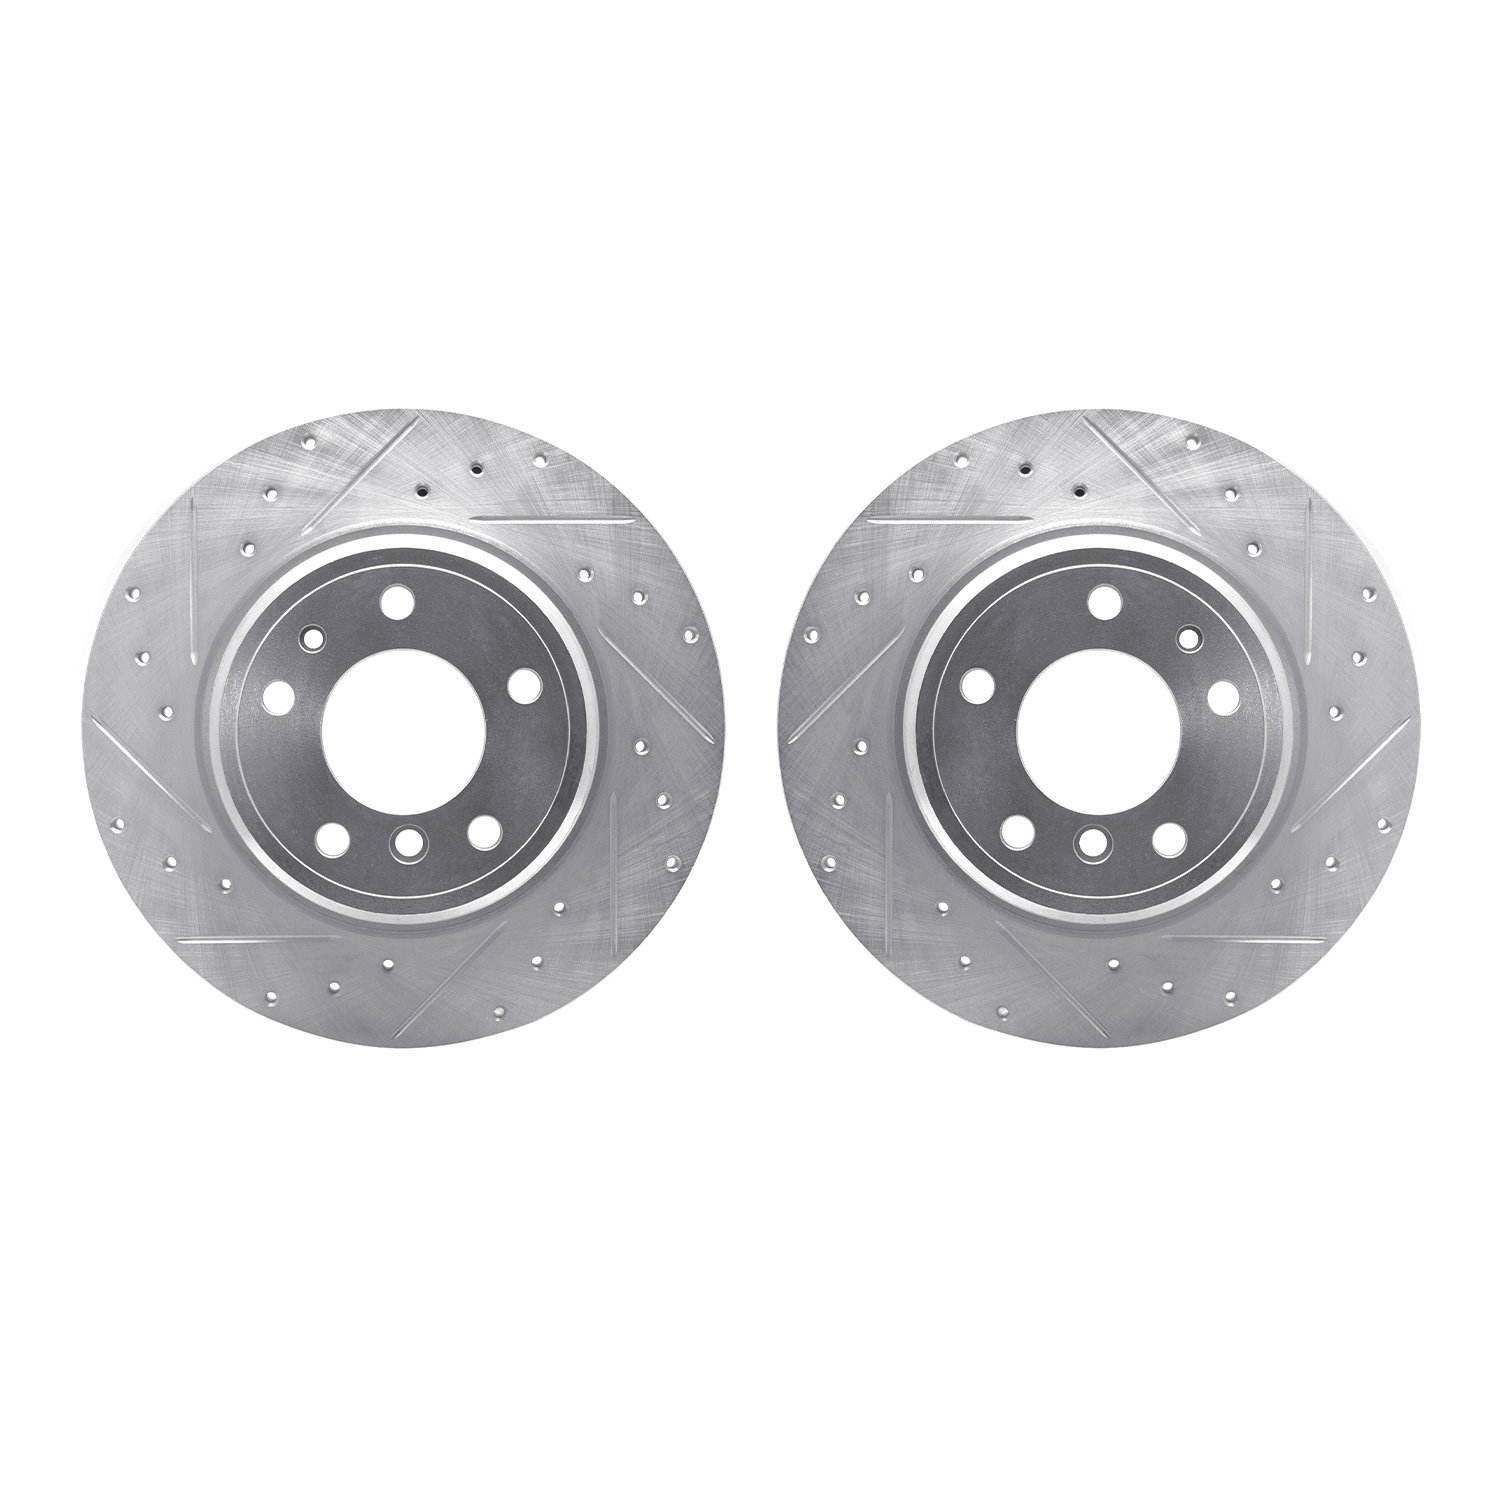 7002-31106 Drilled/Slotted Brake Rotors [Silver], 1991-2001 BMW, Position: Rear